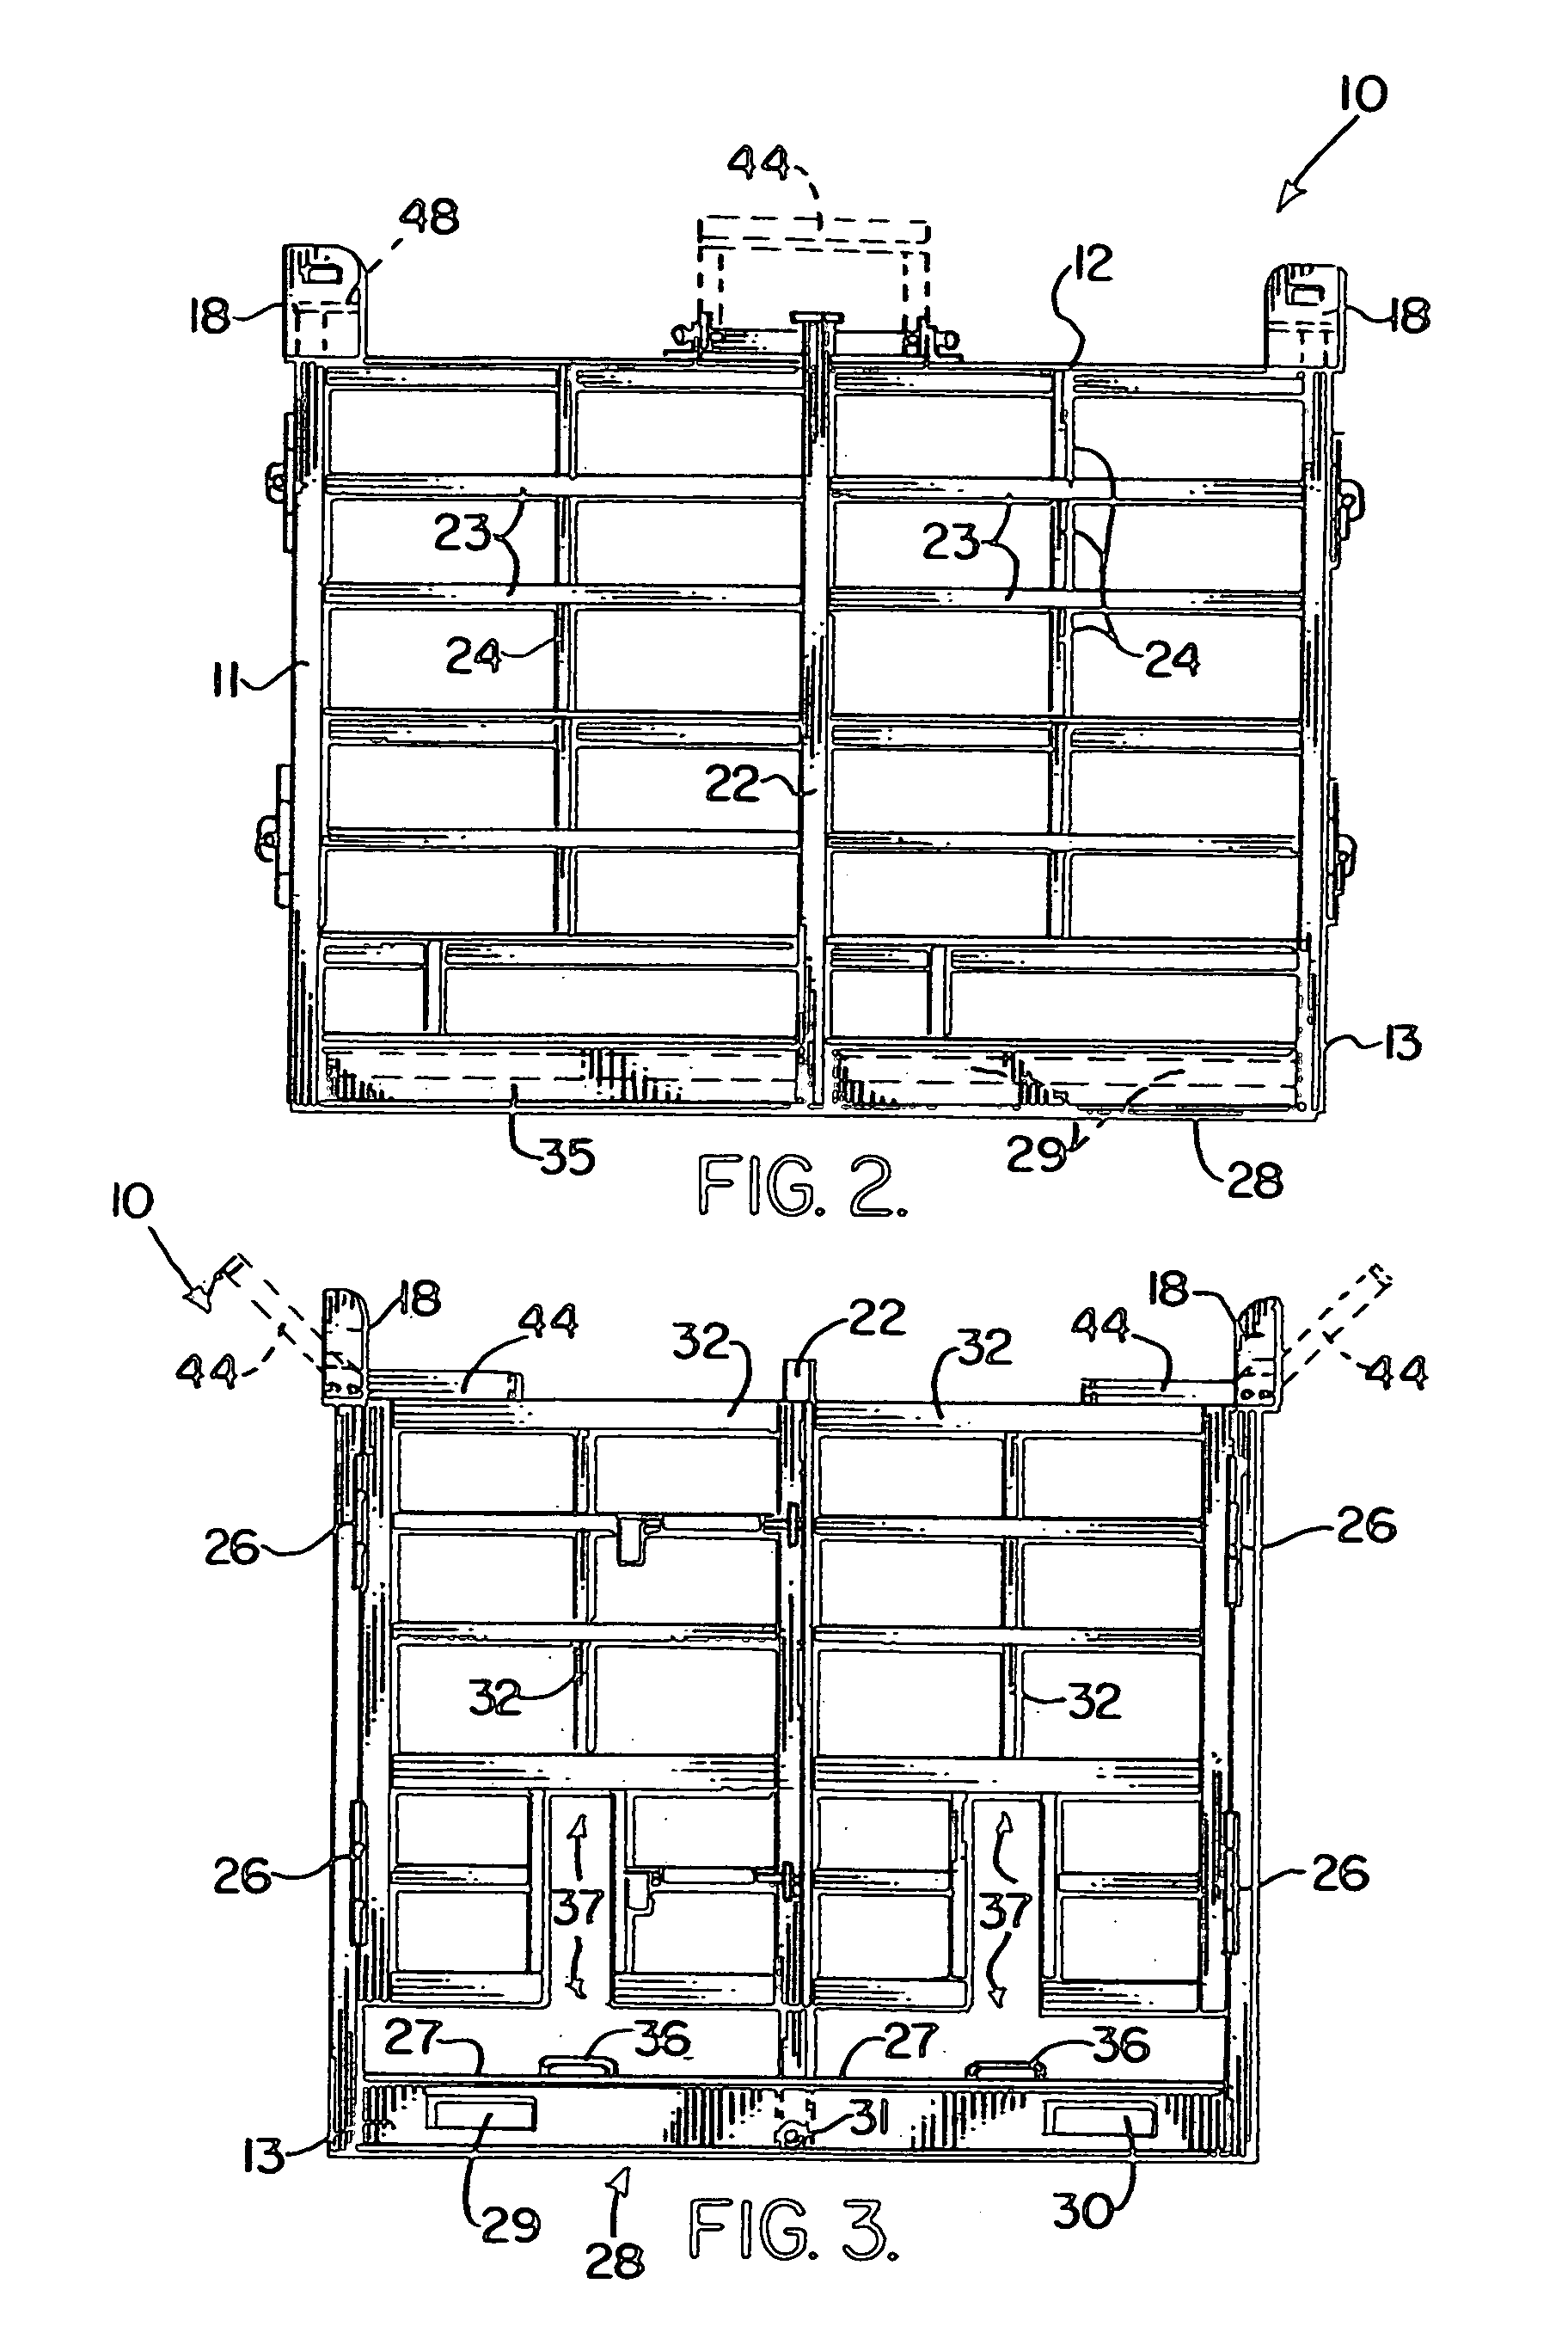 Offshore cargo rack for use in transferring palletized loads between a marine vessel and an offshore platform